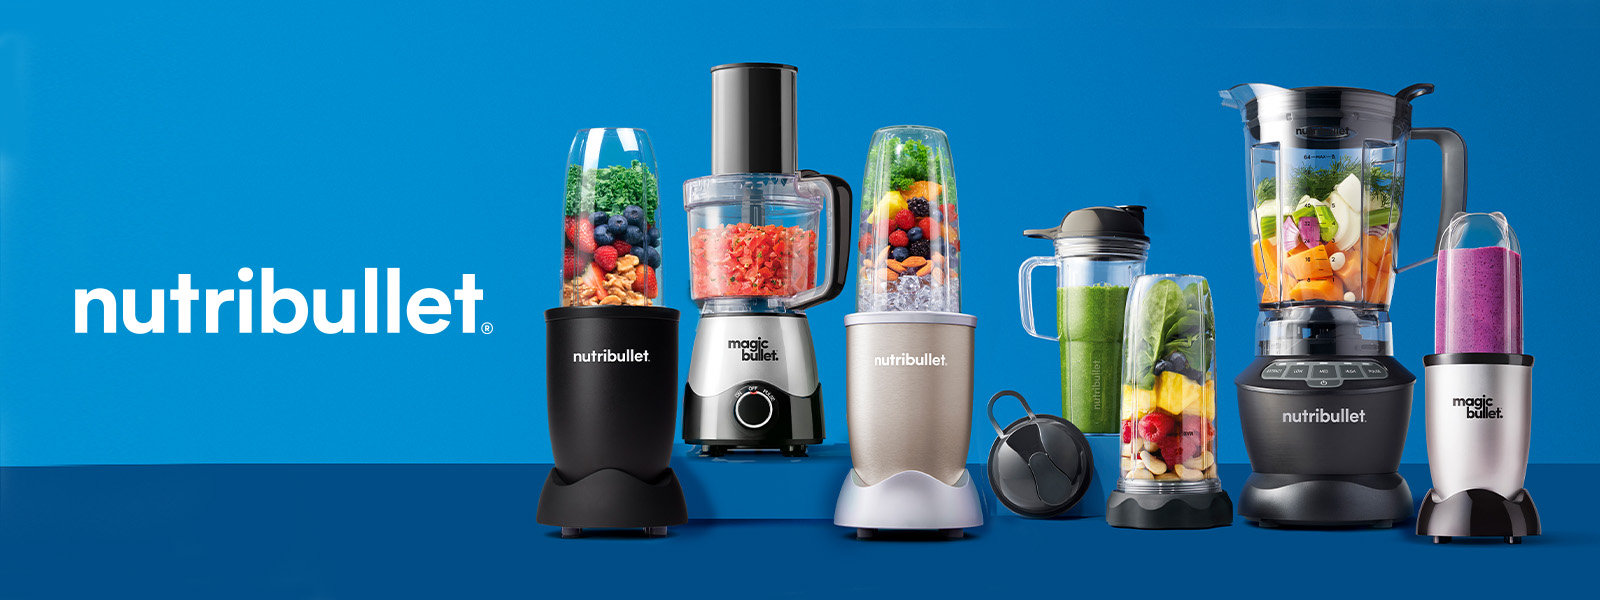 Understanding NutriBullet, the importance and power of brand